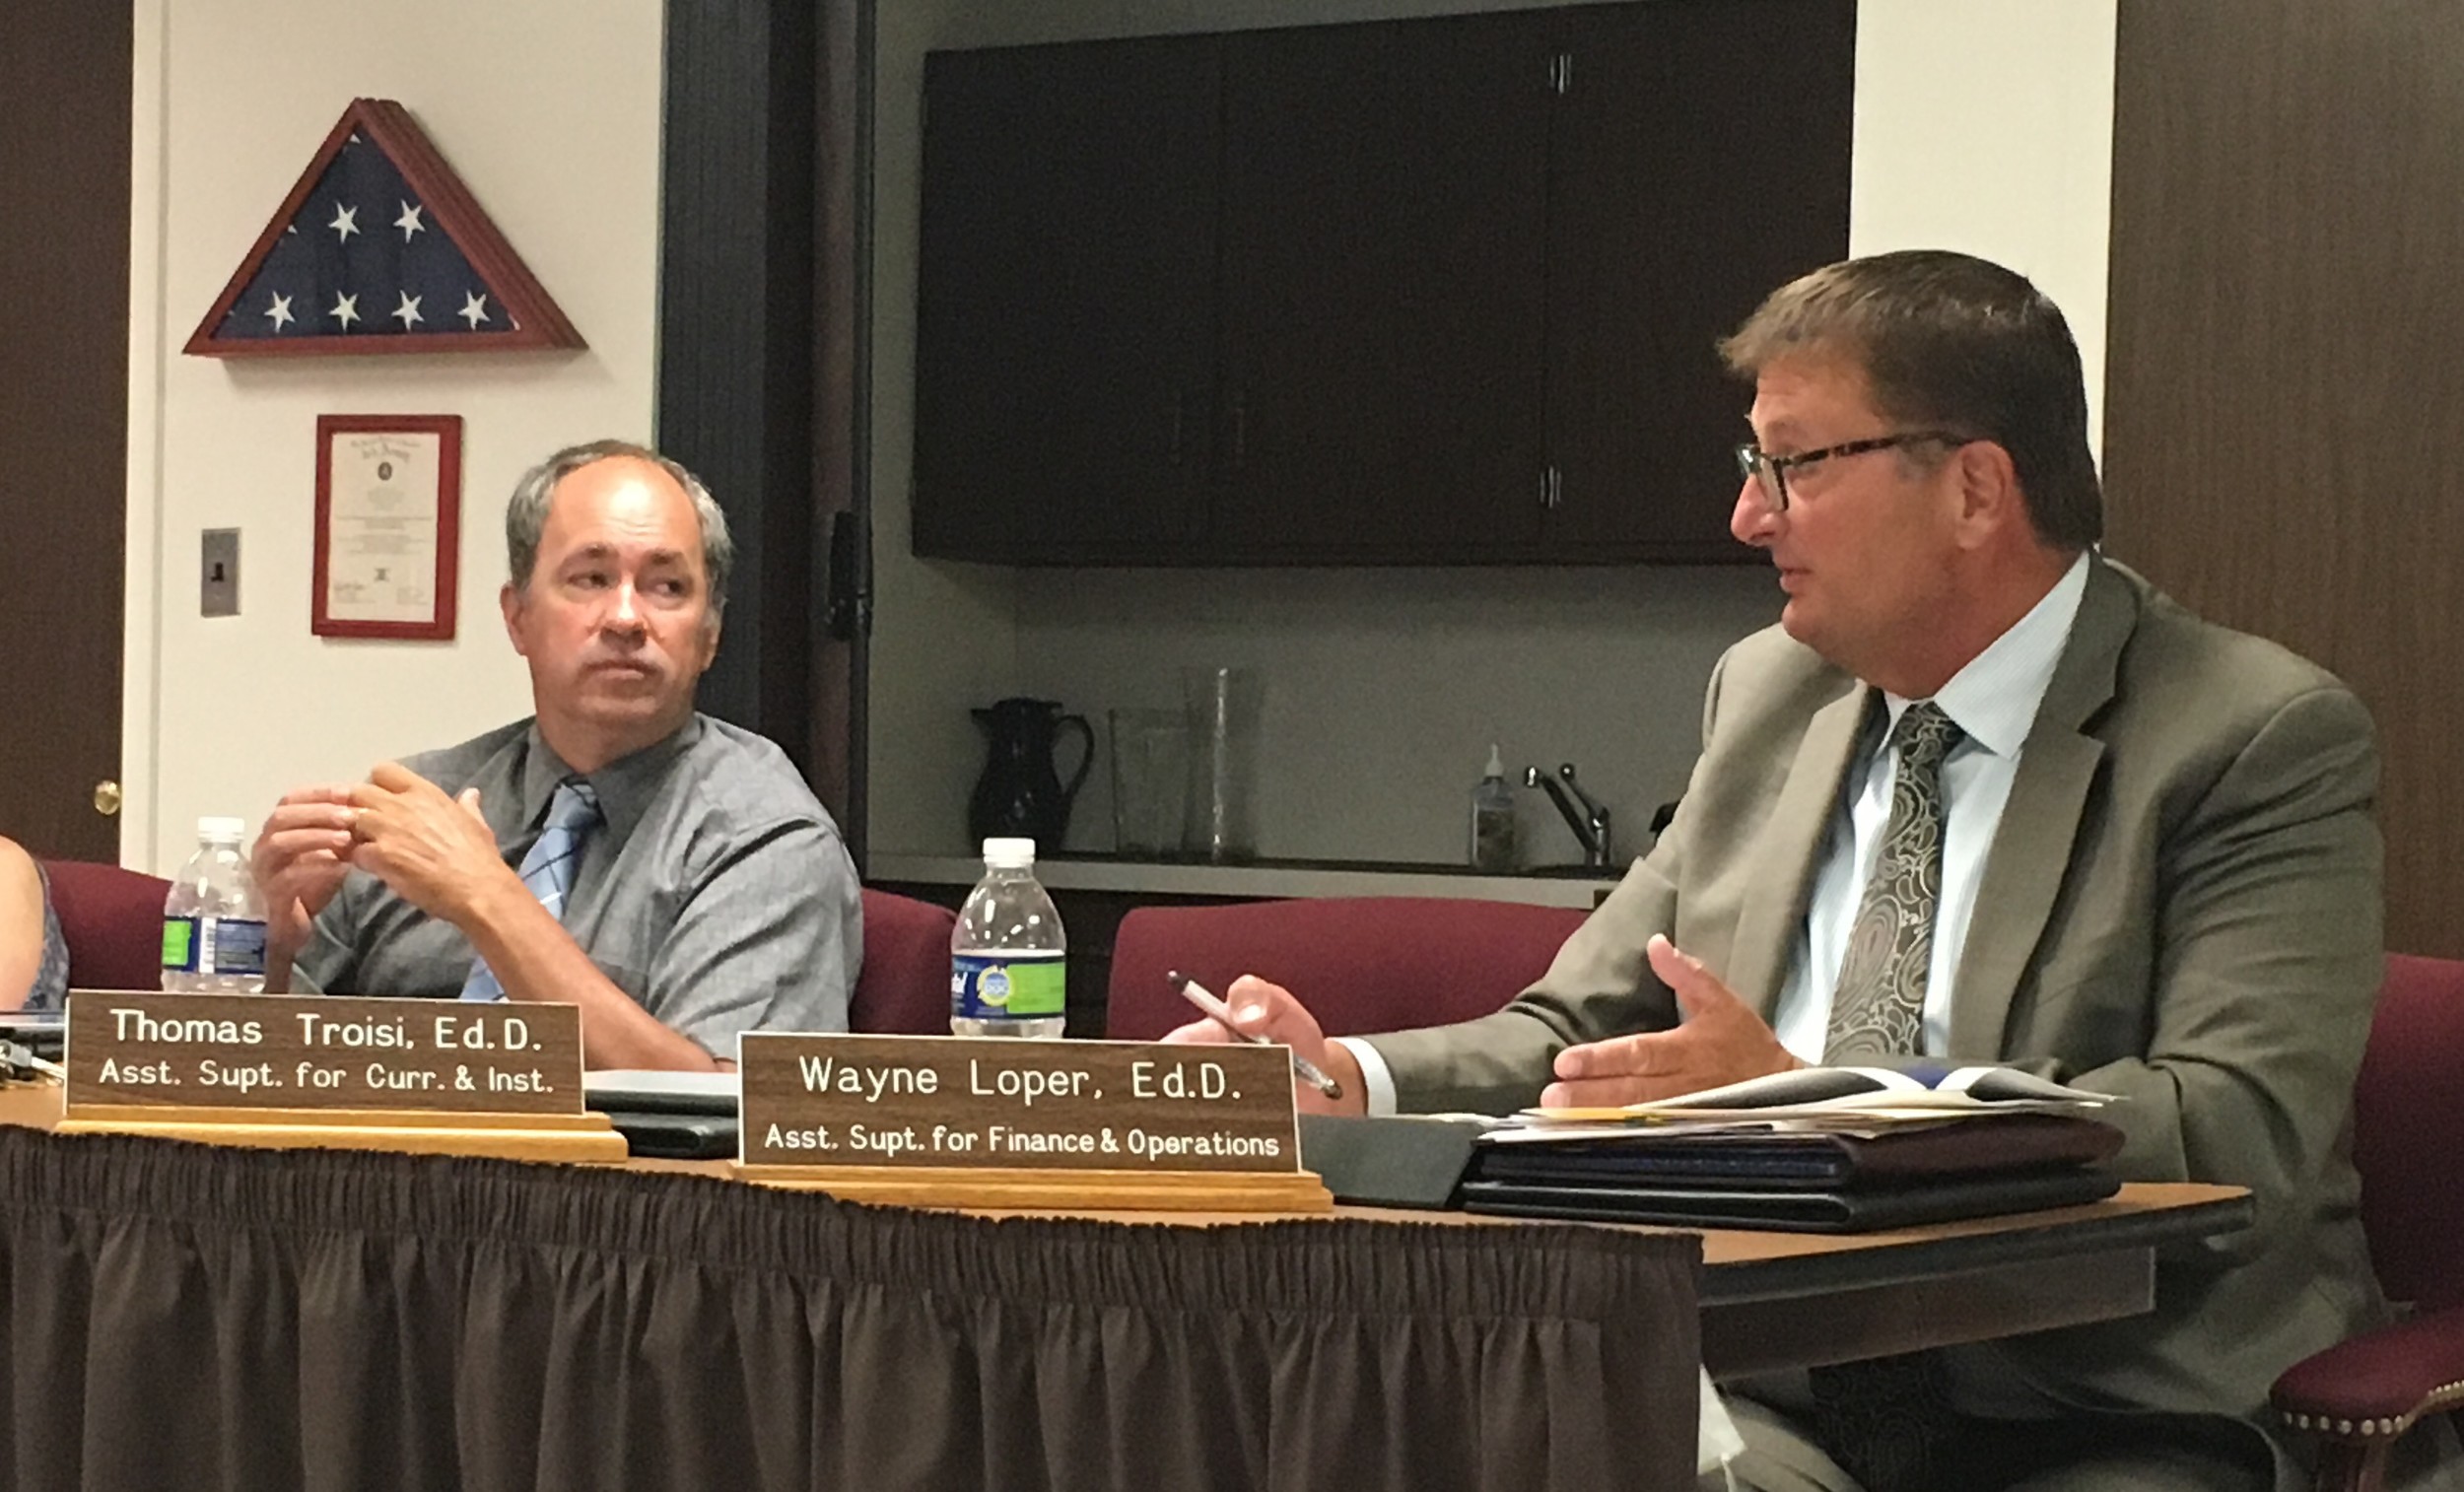 Wayne Loper, assistant superintendent for finance and operations, spoke about the district's necessary facilities upgrades, and how to fund them, at the July 12 Board of Education meeting.